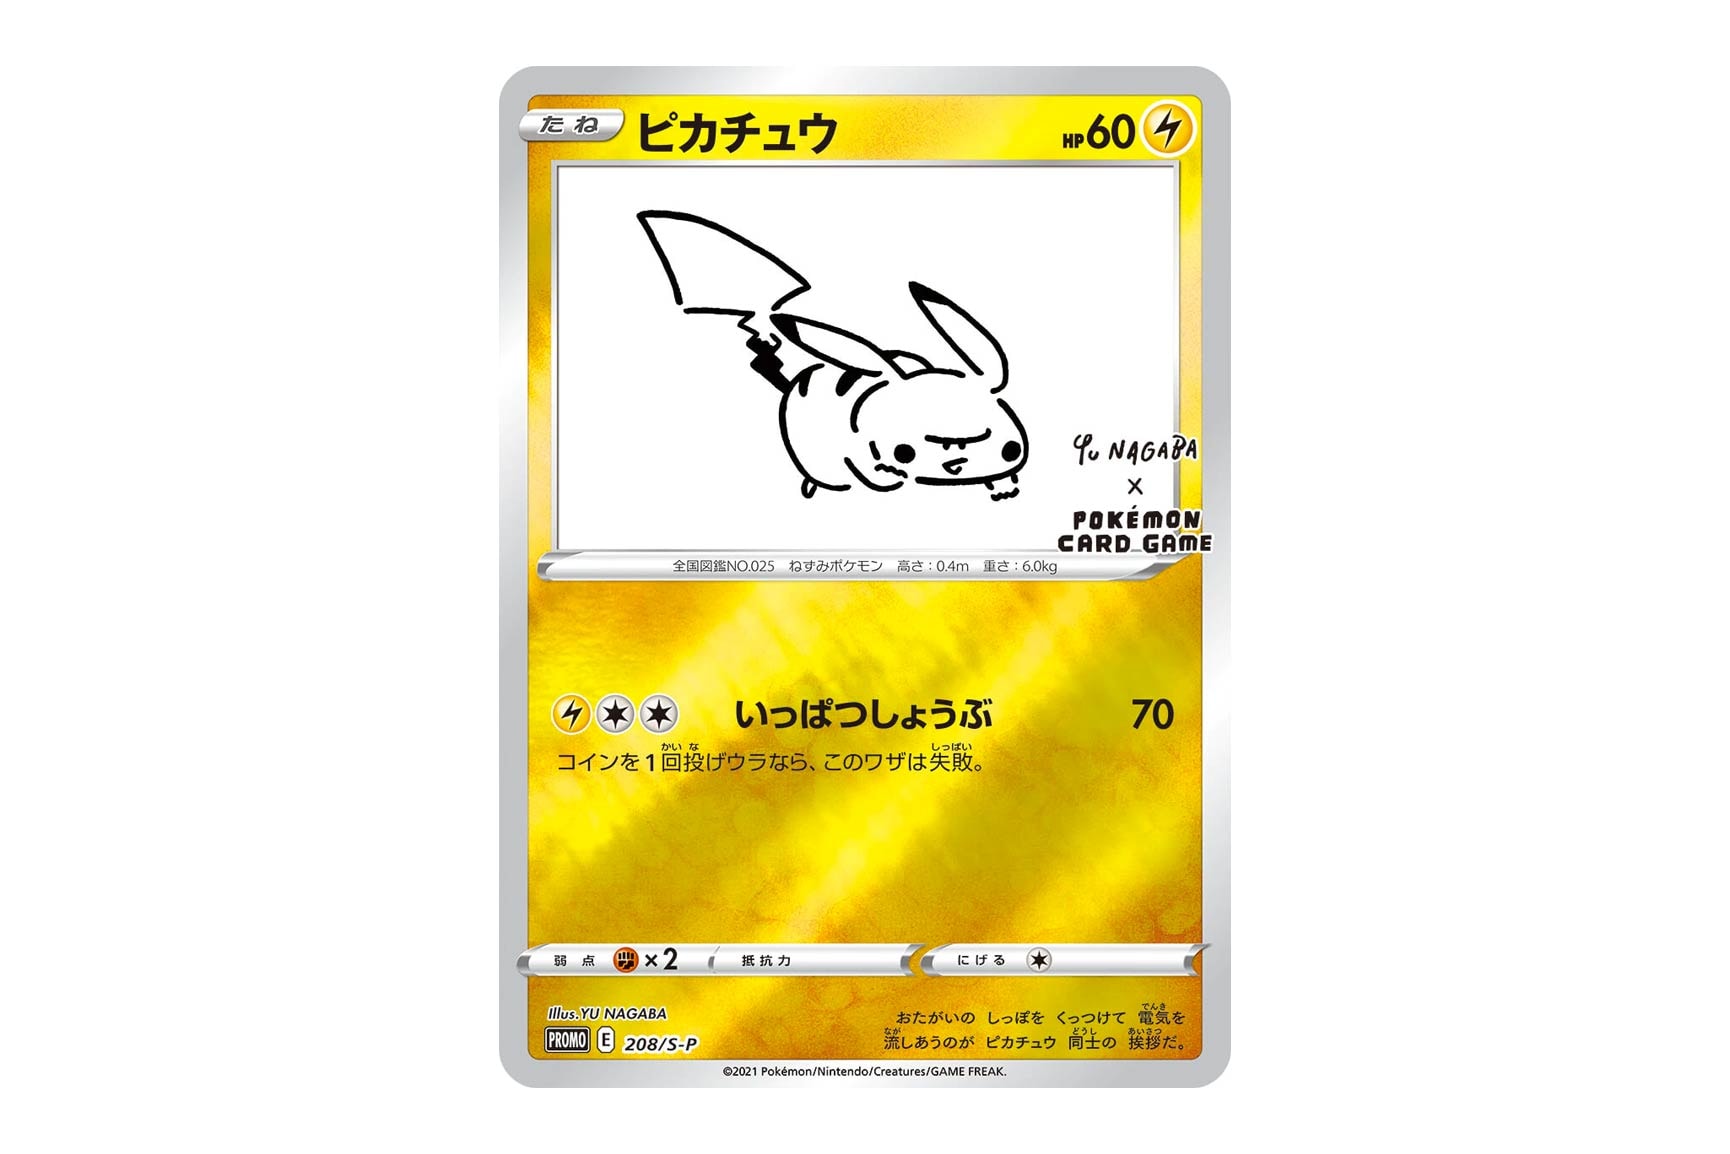 Buy Pokemon White from Japan - Buy authentic Plus exclusive items from  Japan